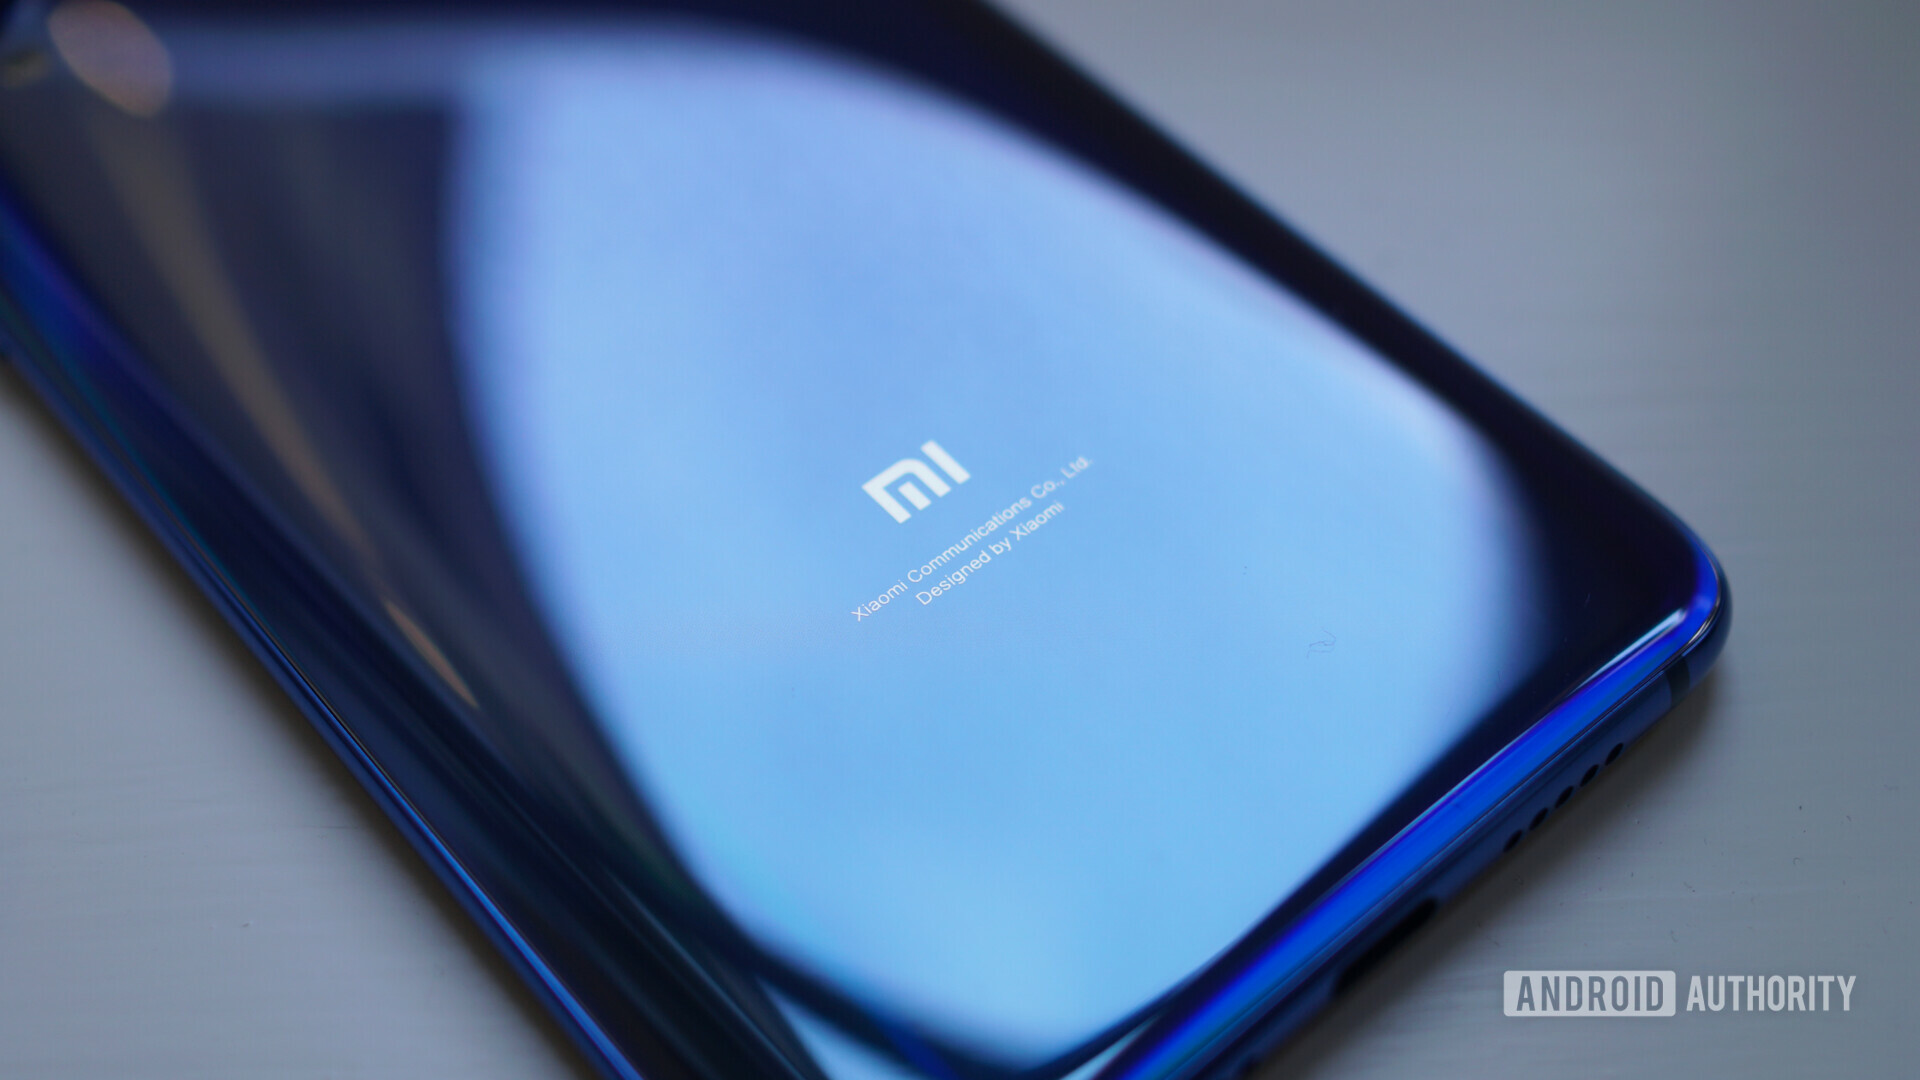 The Xiaomi Mi 9 pales in comparison to the 5G model in terms of charging.